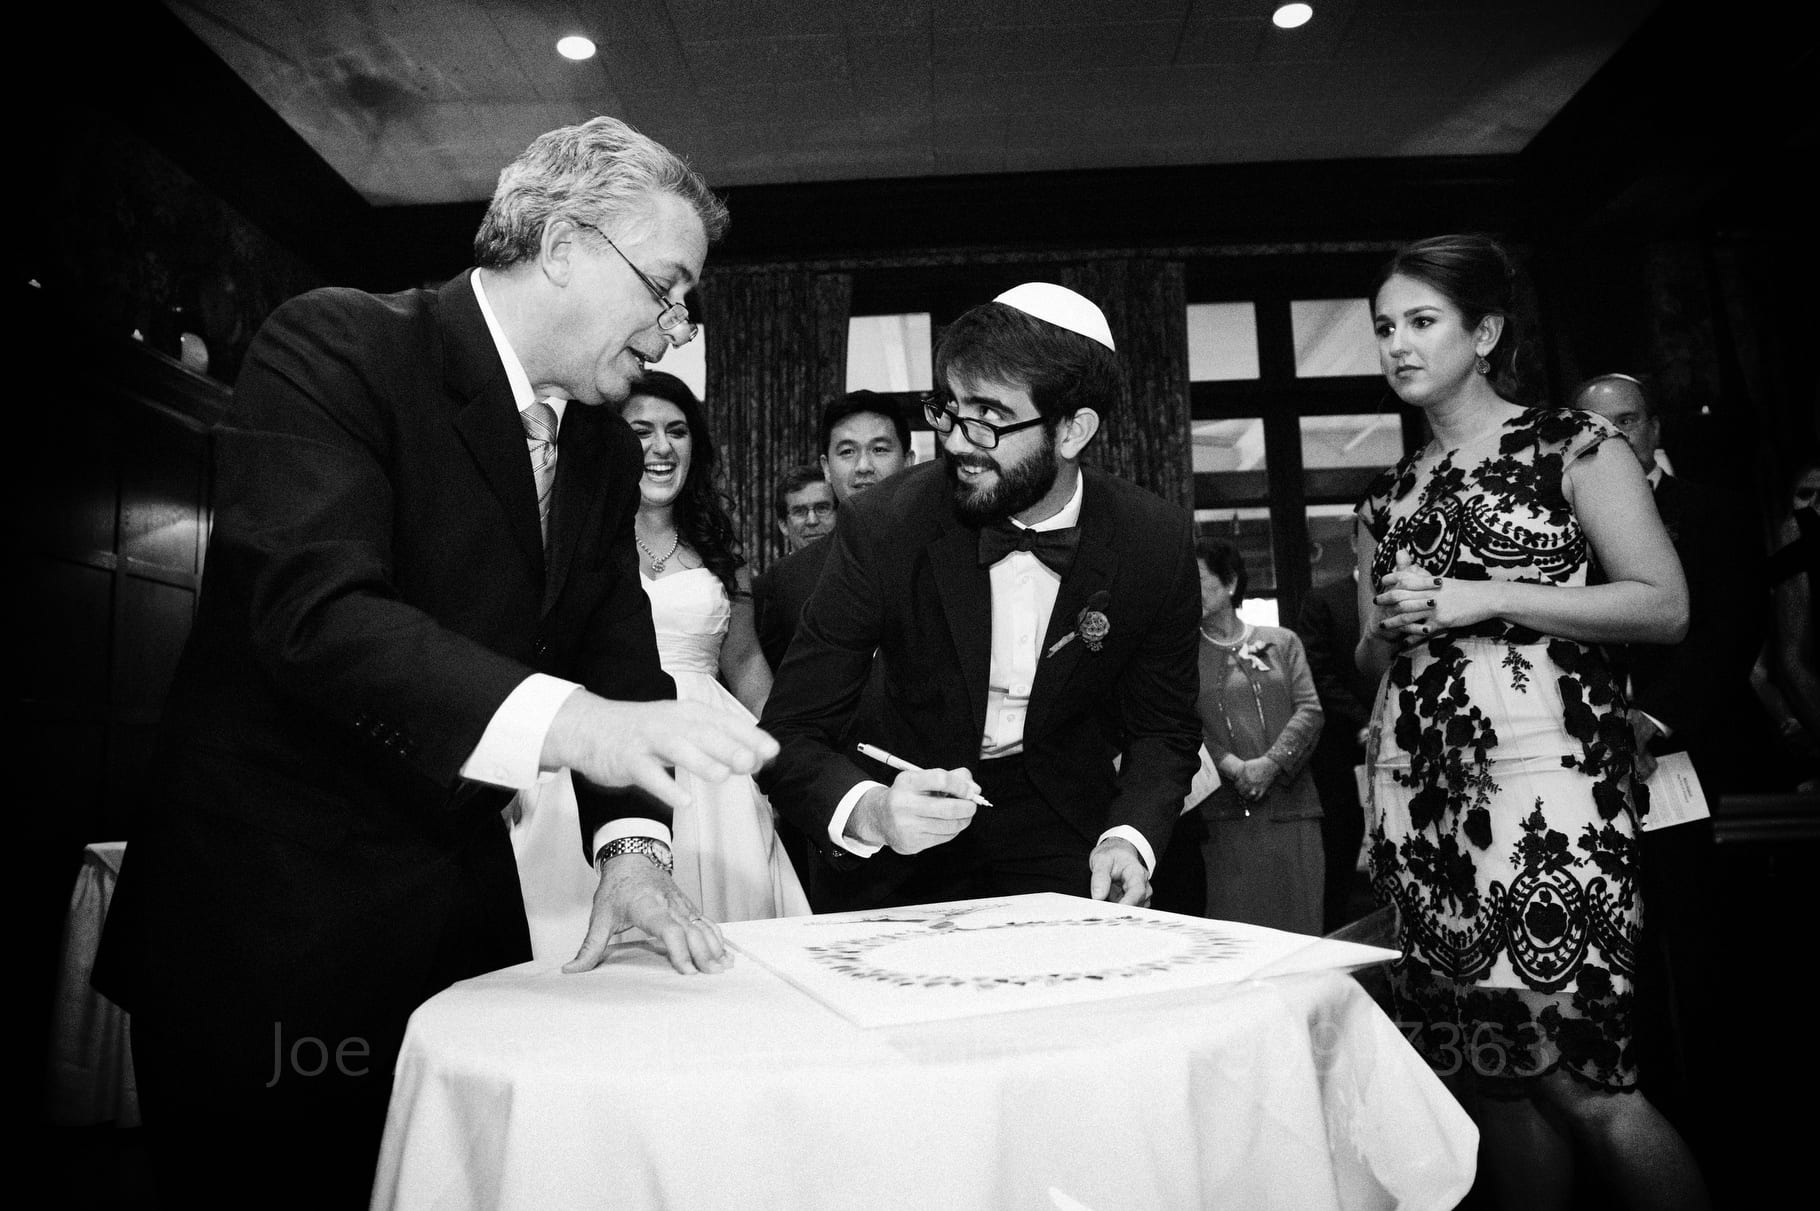 witness smiles as he looks at a rabbi who is giving him instruction on where to sign the ketubah during a wedding at the Pittsburgh Golf Club